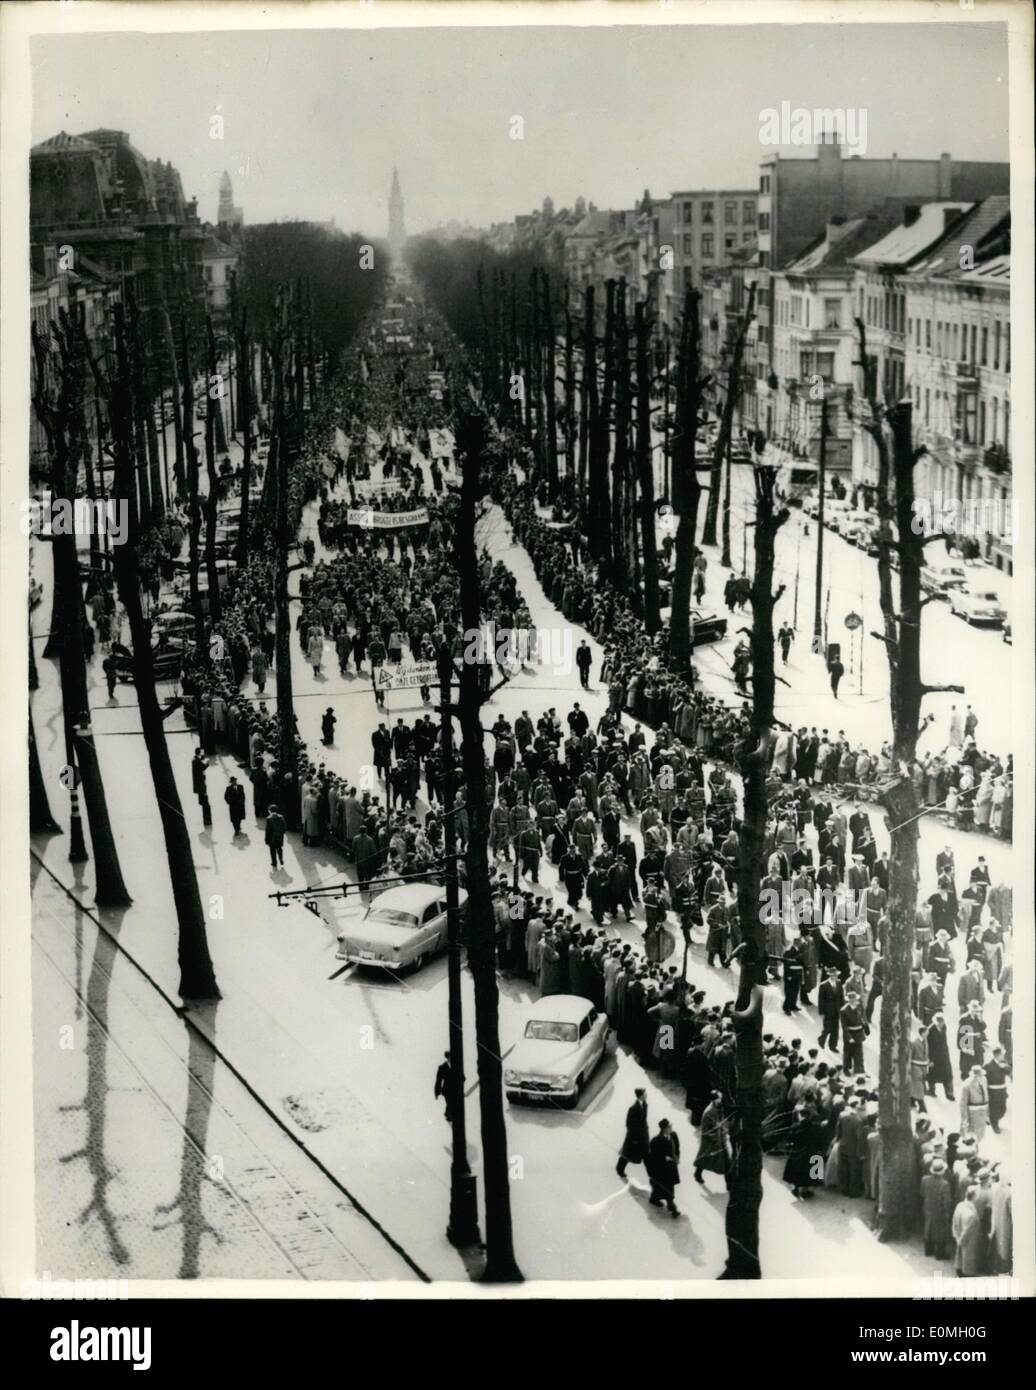 Apr. 04, 1955 - Catholics March In Antwerp Parade Ends Two Weeks Easter Truce: More than 20,000 Catholics marched through the streets of Antwerp, Belgium,, yesterday in Protest against the Socialist - liberal Government's reform bill. This mass demonstration ended the two weeks truce over Easter - in situation which erupted into riots in Brussels on March 26th. and in which 90 people were injure and 1,500 arrested.Photo Shows General view during the mass demonstration through the streets of Antwerp. Stock Photo